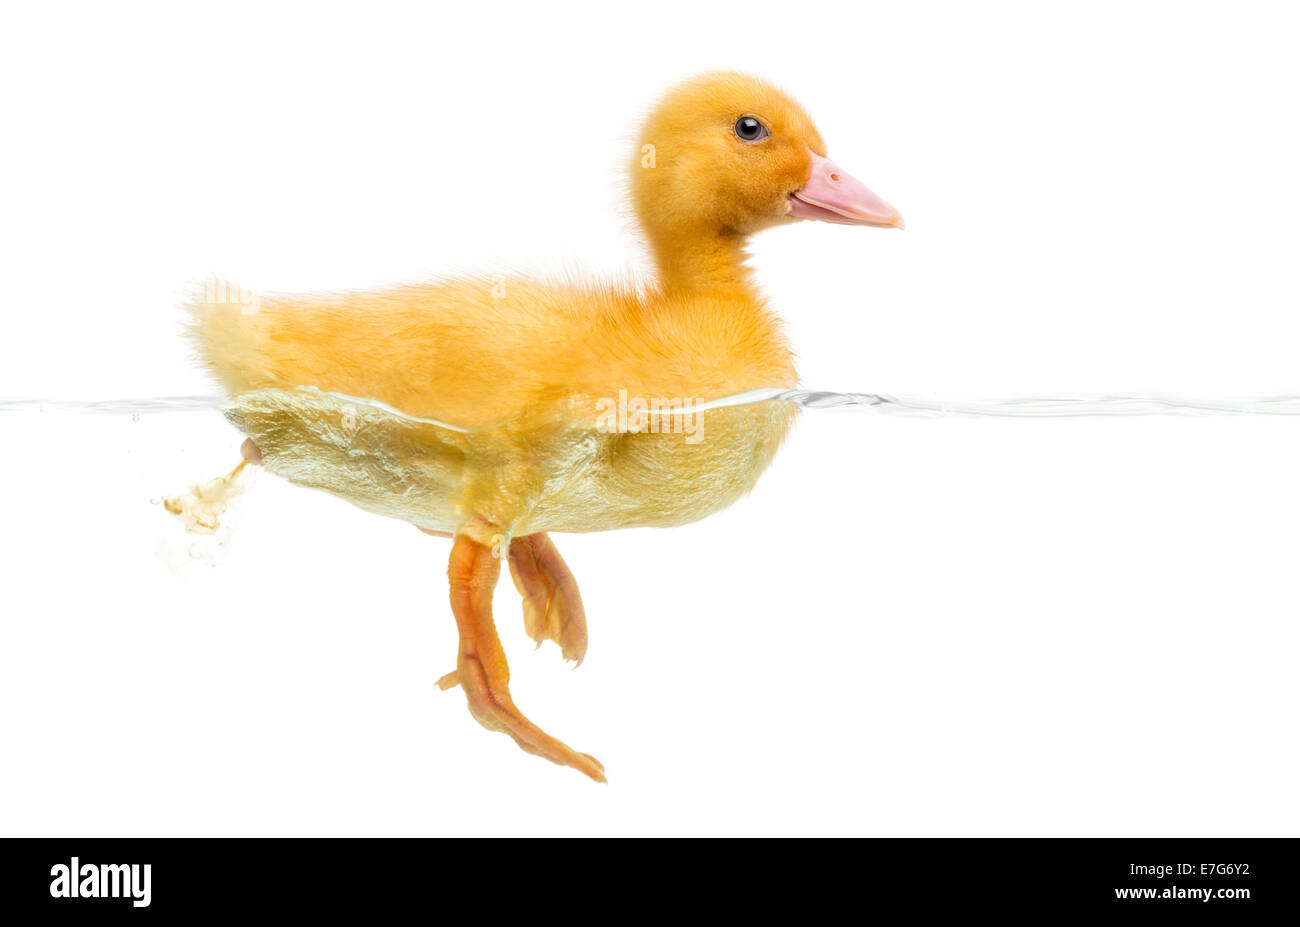 Duckling (7 days old) swimming and defecating against white background Stock Photo